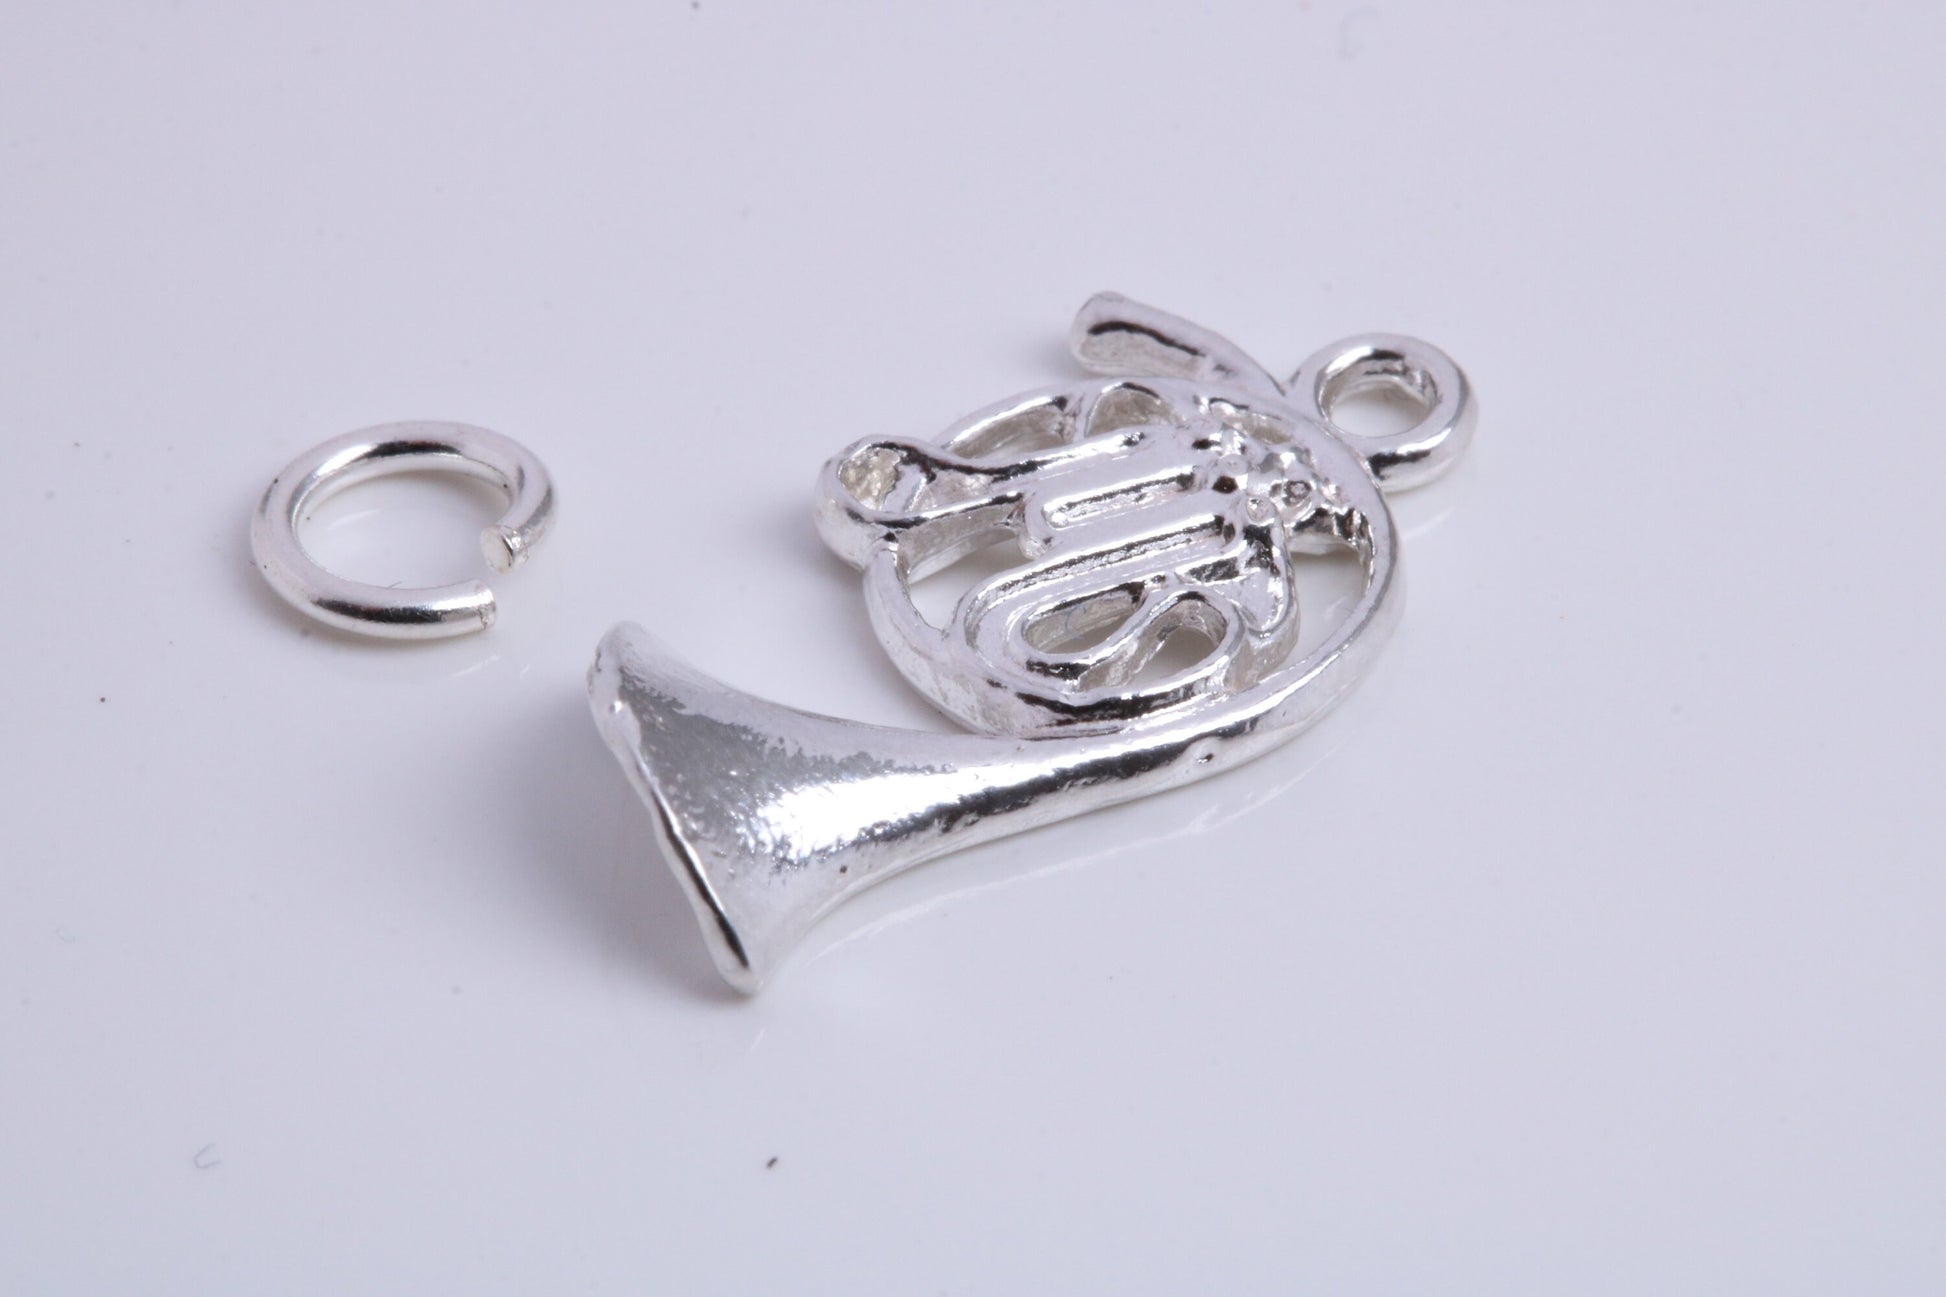 French Horn Charm, Traditional Charm, Made from Solid 925 Grade Sterling Silver, Complete with Attachment Link